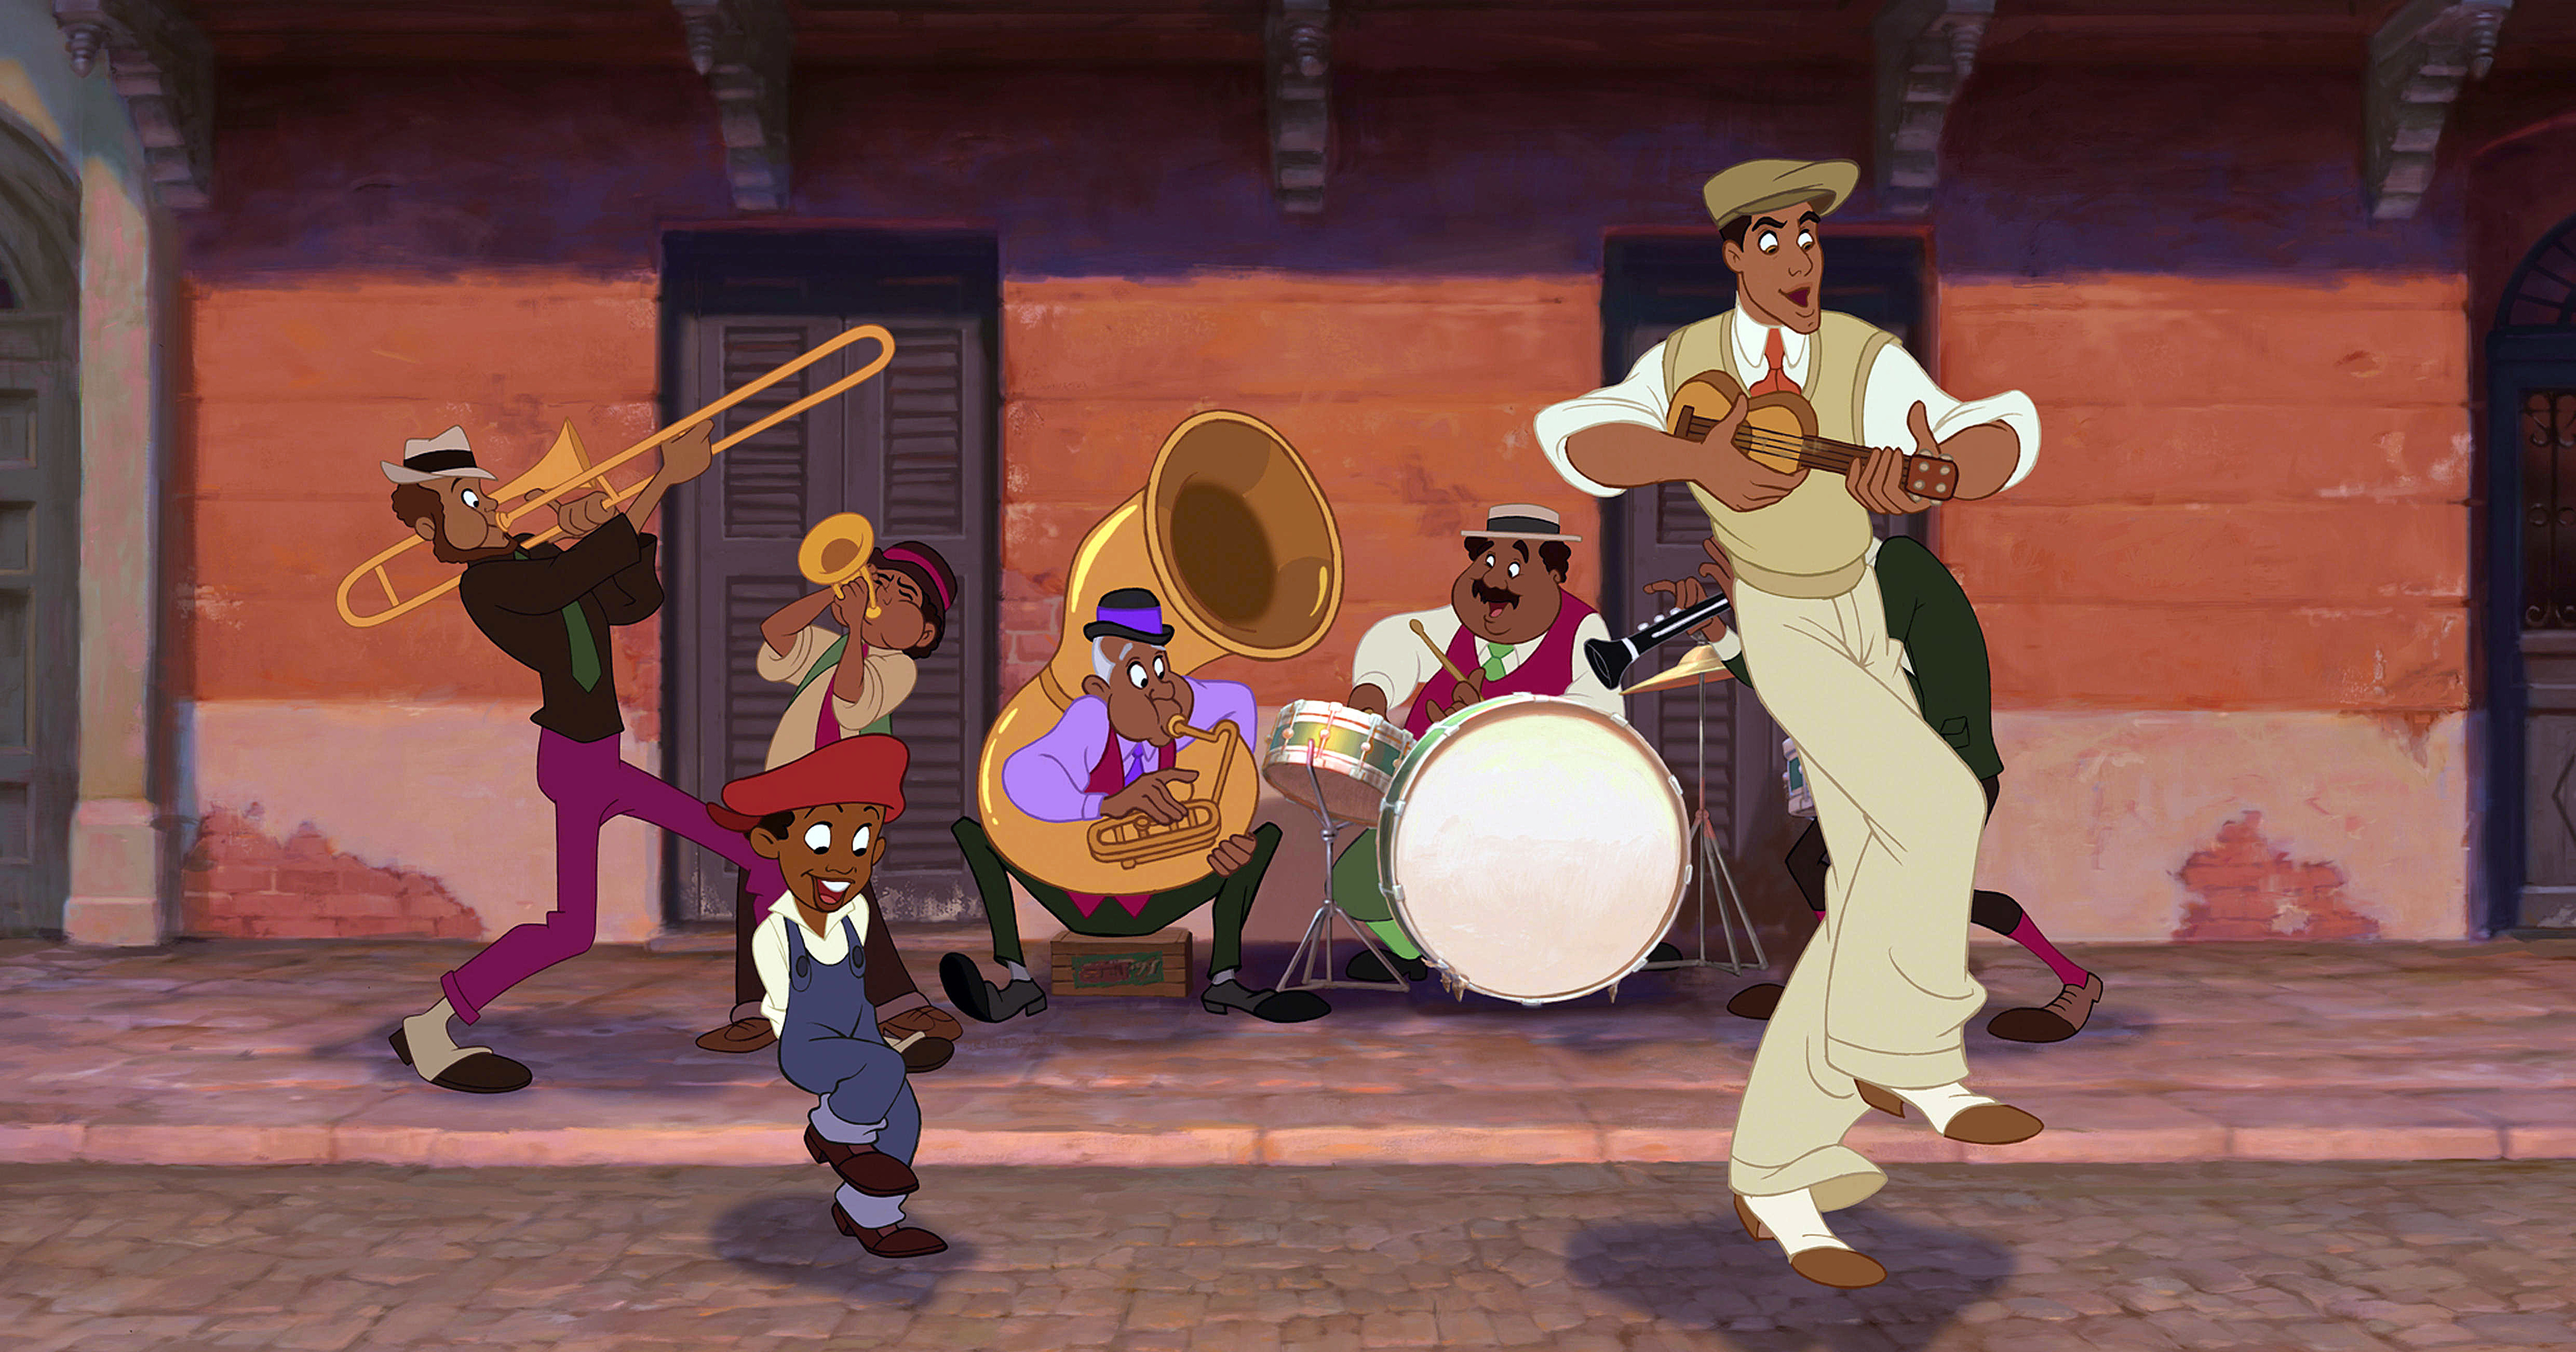 Animated scene from &quot;The Princess and the Frog&quot; featuring Tiana, Prince Naveen, and a lively jazz band playing instruments on a street